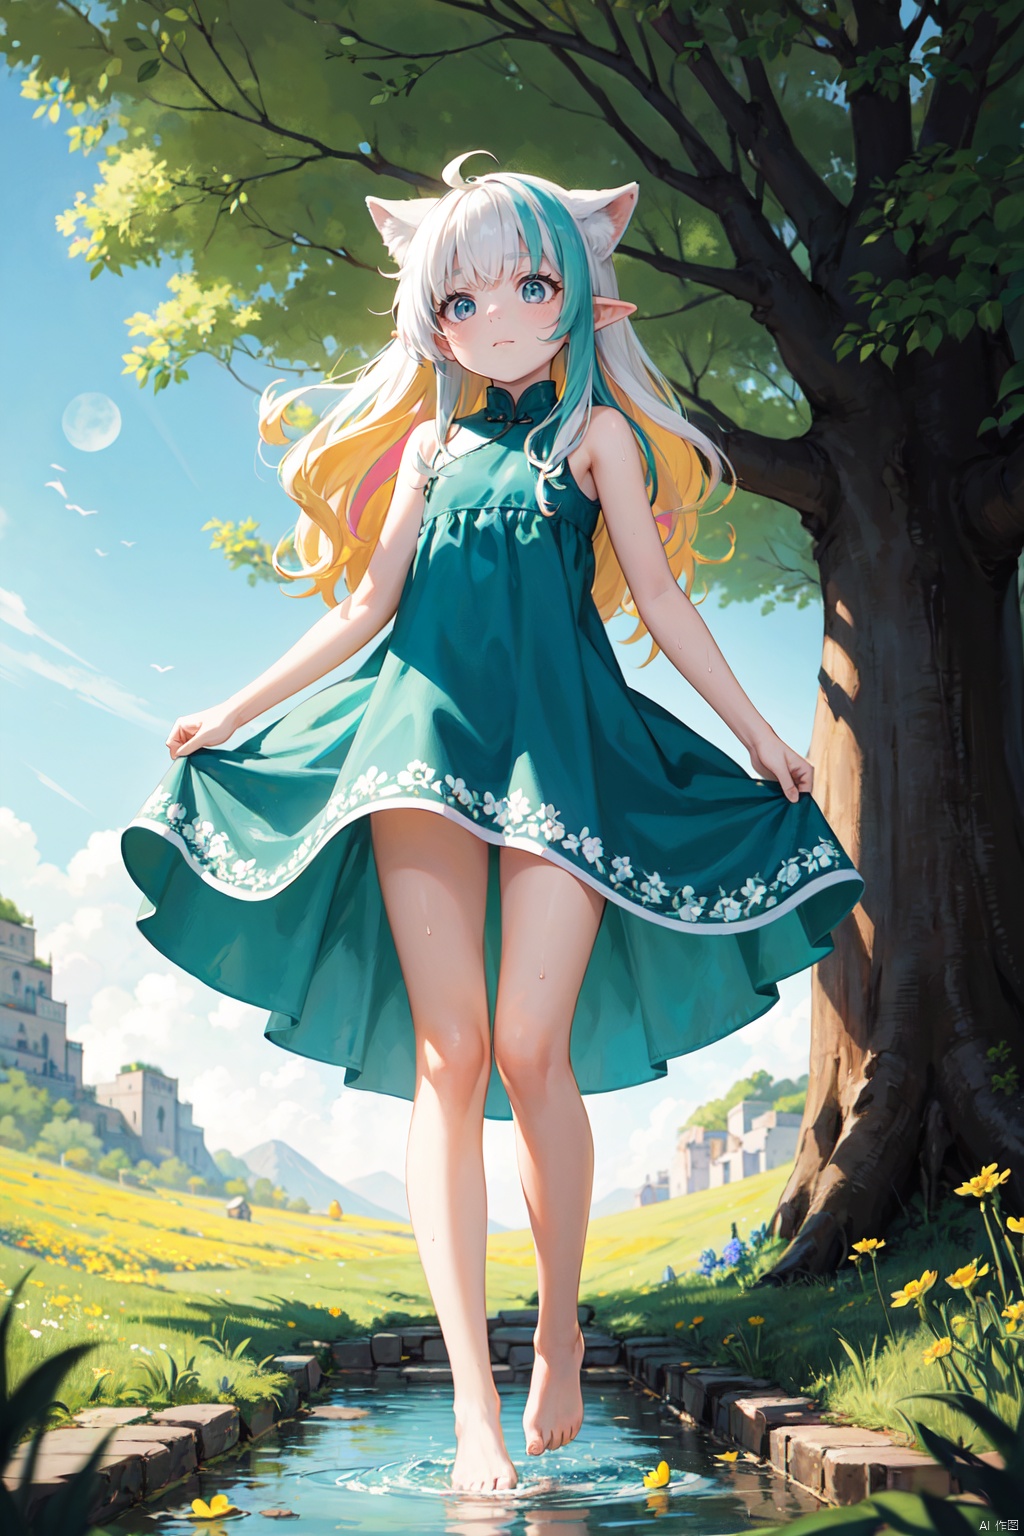  (masterpiece), (best quality),(illustration), ((chinese colorful ink)), best quality, epic scenes, impactful visuals, 1girl,bare shoulders,Light blue eyes,Sparkling eyes,(White light green gradient hair:1),(Light green dress with patterns),(bare legs),(Stepping on the stream:1),(holding flower:1.2),barefoot,long pointy ears,nose blush,flat color,closed mouth,hair twirling,flat color,standing,long hair,solo, green theme,the setting sun,vines,forest,Chamomile,cornflower,lens flare,hdr,Tyndall effect,damp,wet,Yona is very pretty, even without any makeup on. Her fox-like features are very cute and her body looks so soft, like you can squeeze it and it would be like hugging the most comfy pillow. Her hair is long and multicoloured with its natural wavy style, and her eyes are stunning even though they're just azure. It's amazing how she can look so beautiful even without trying.